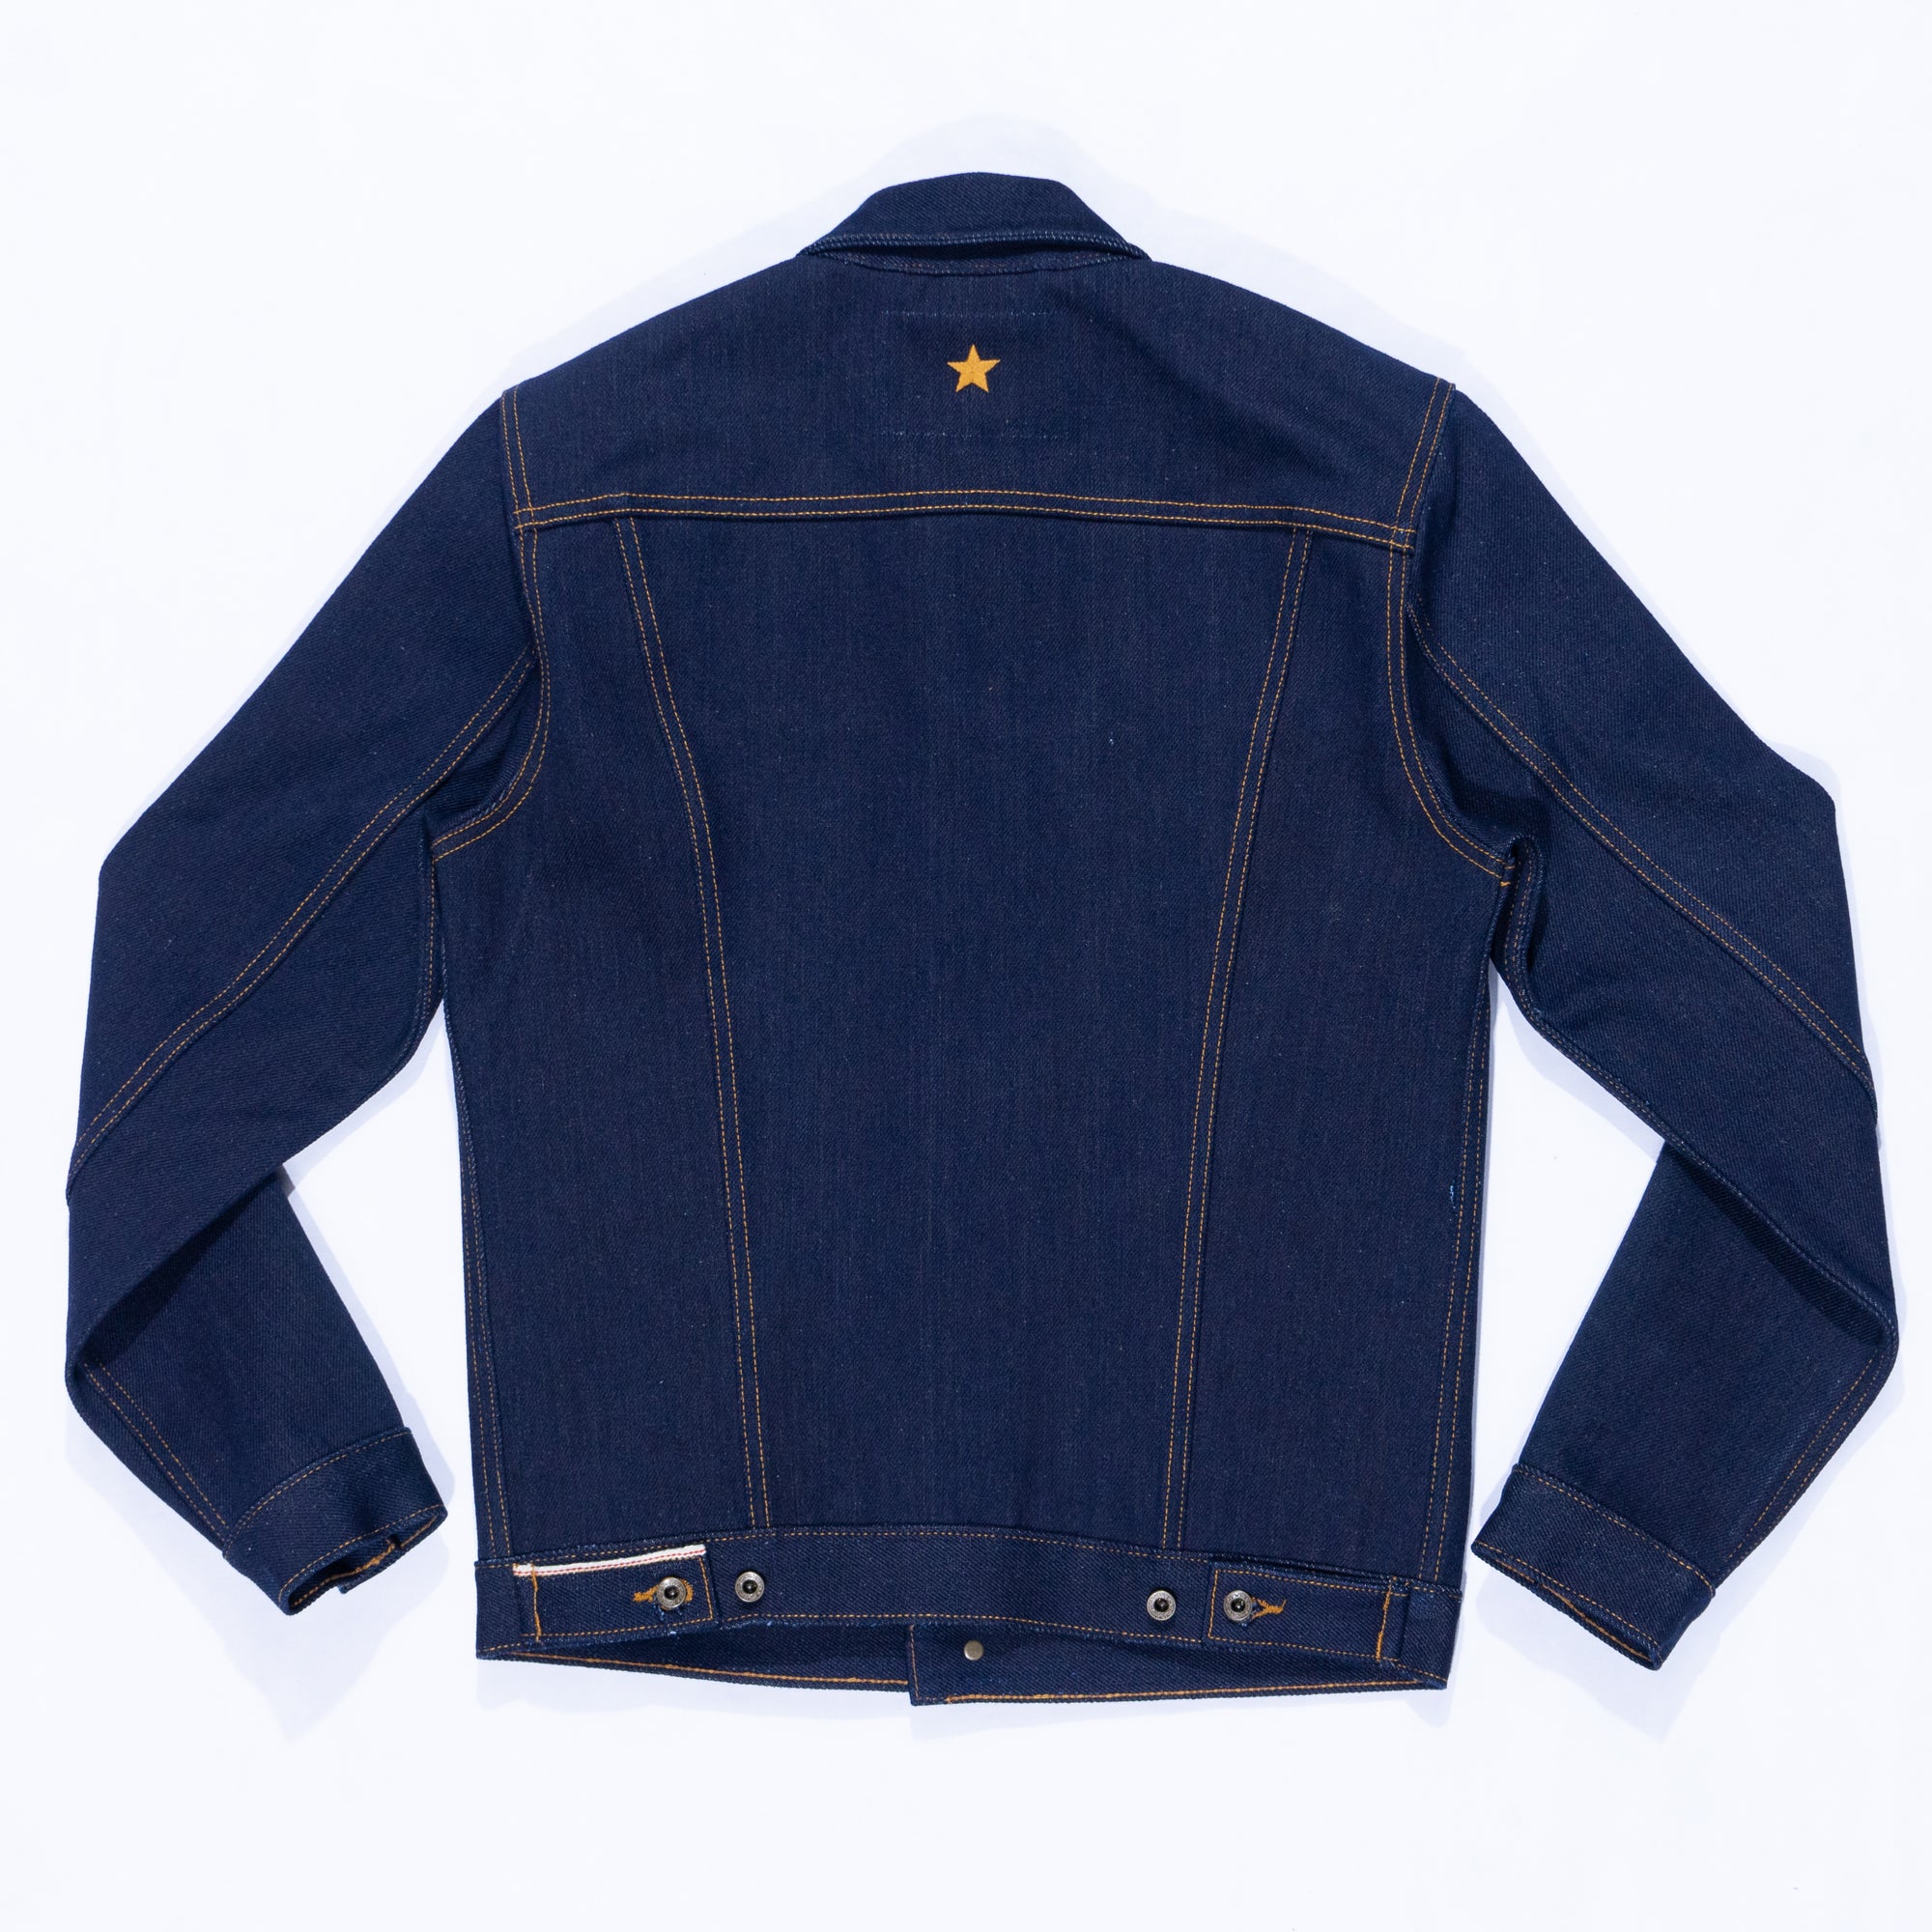 Roundup of the Ironside Sherpa being - Brave Star Selvage